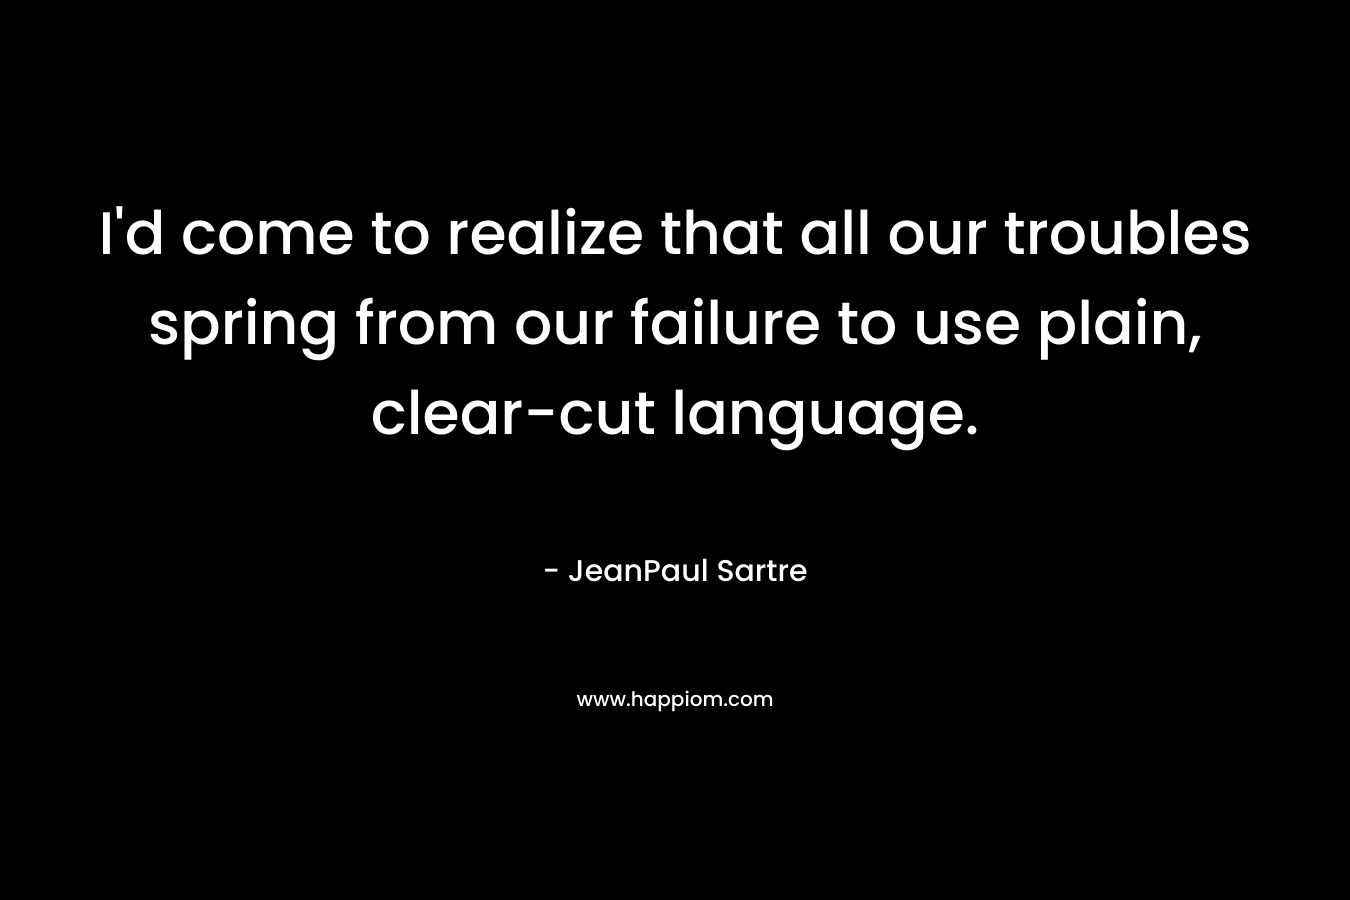 I'd come to realize that all our troubles spring from our failure to use plain, clear-cut language.